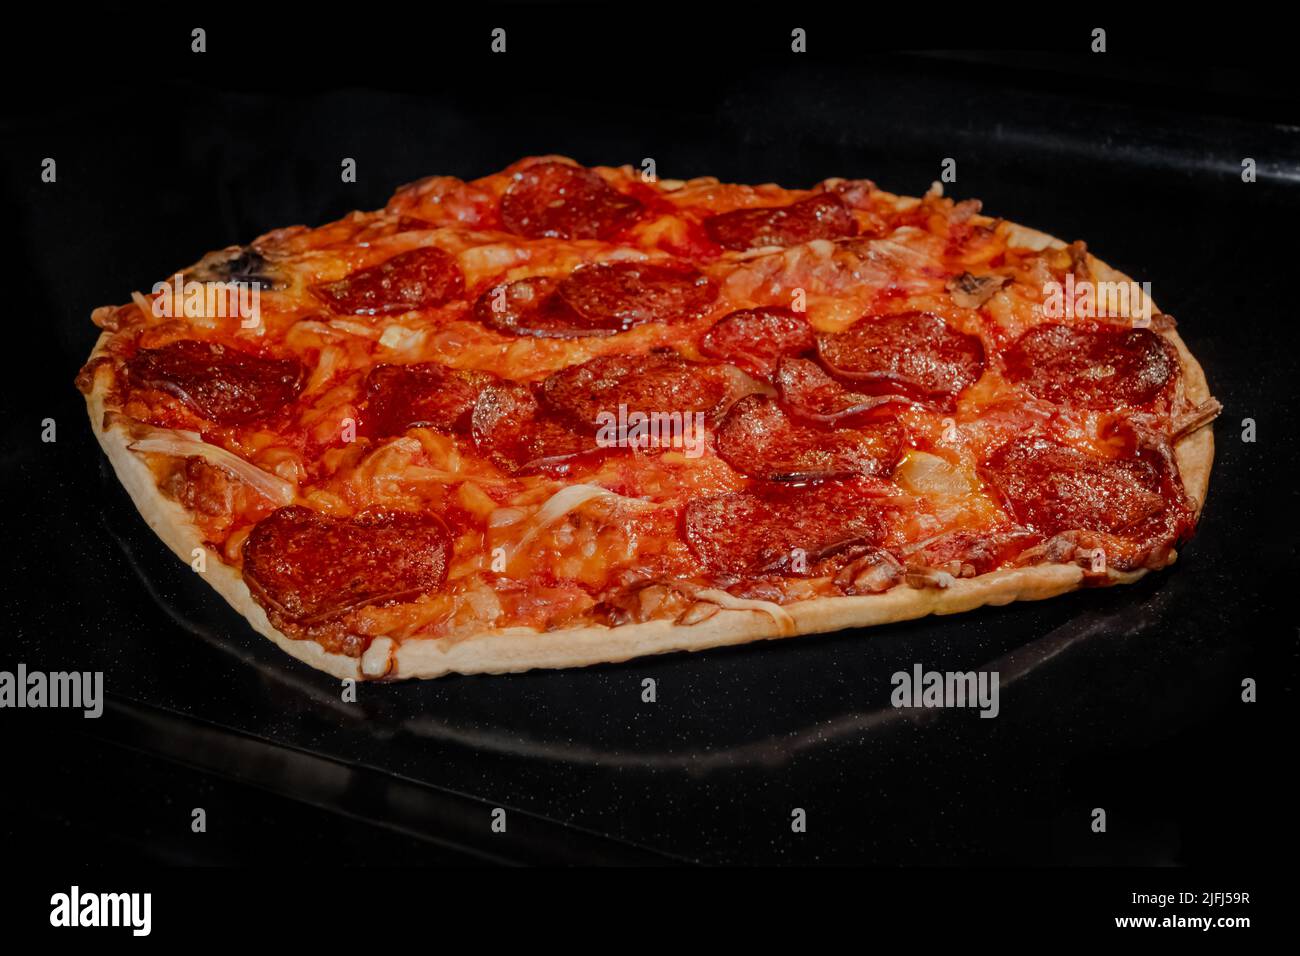 Burnt homemade pizza on tray in electric oven, black background Stock Photo